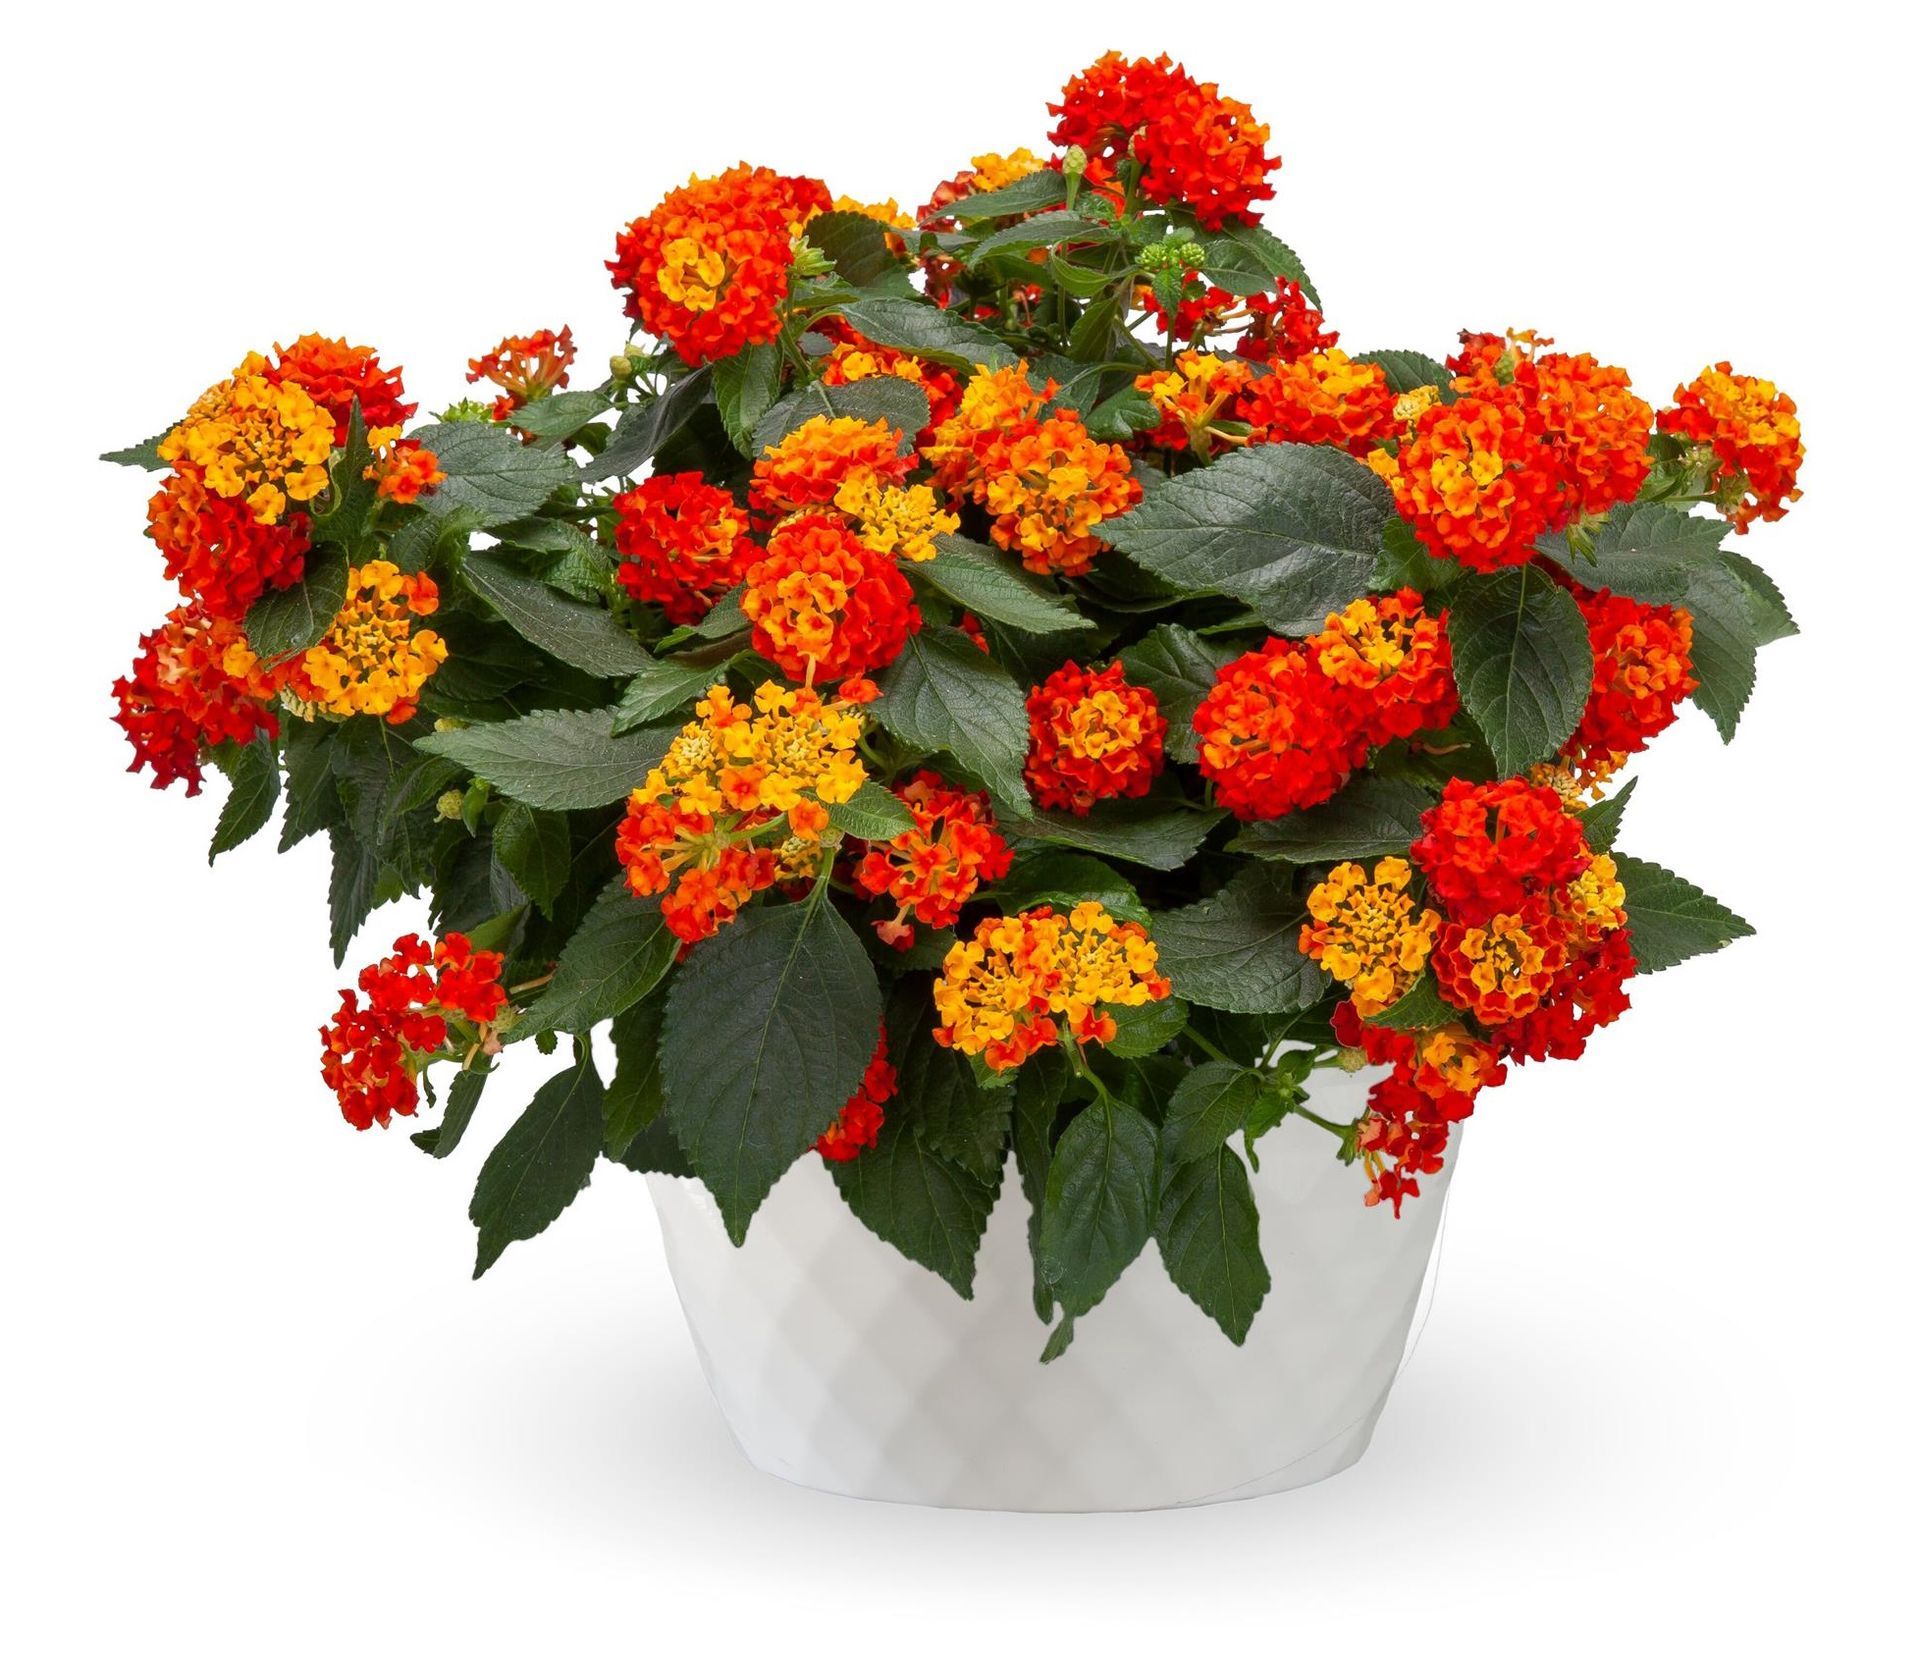 Lantana Red Chili flower for sale in Lebanon PA